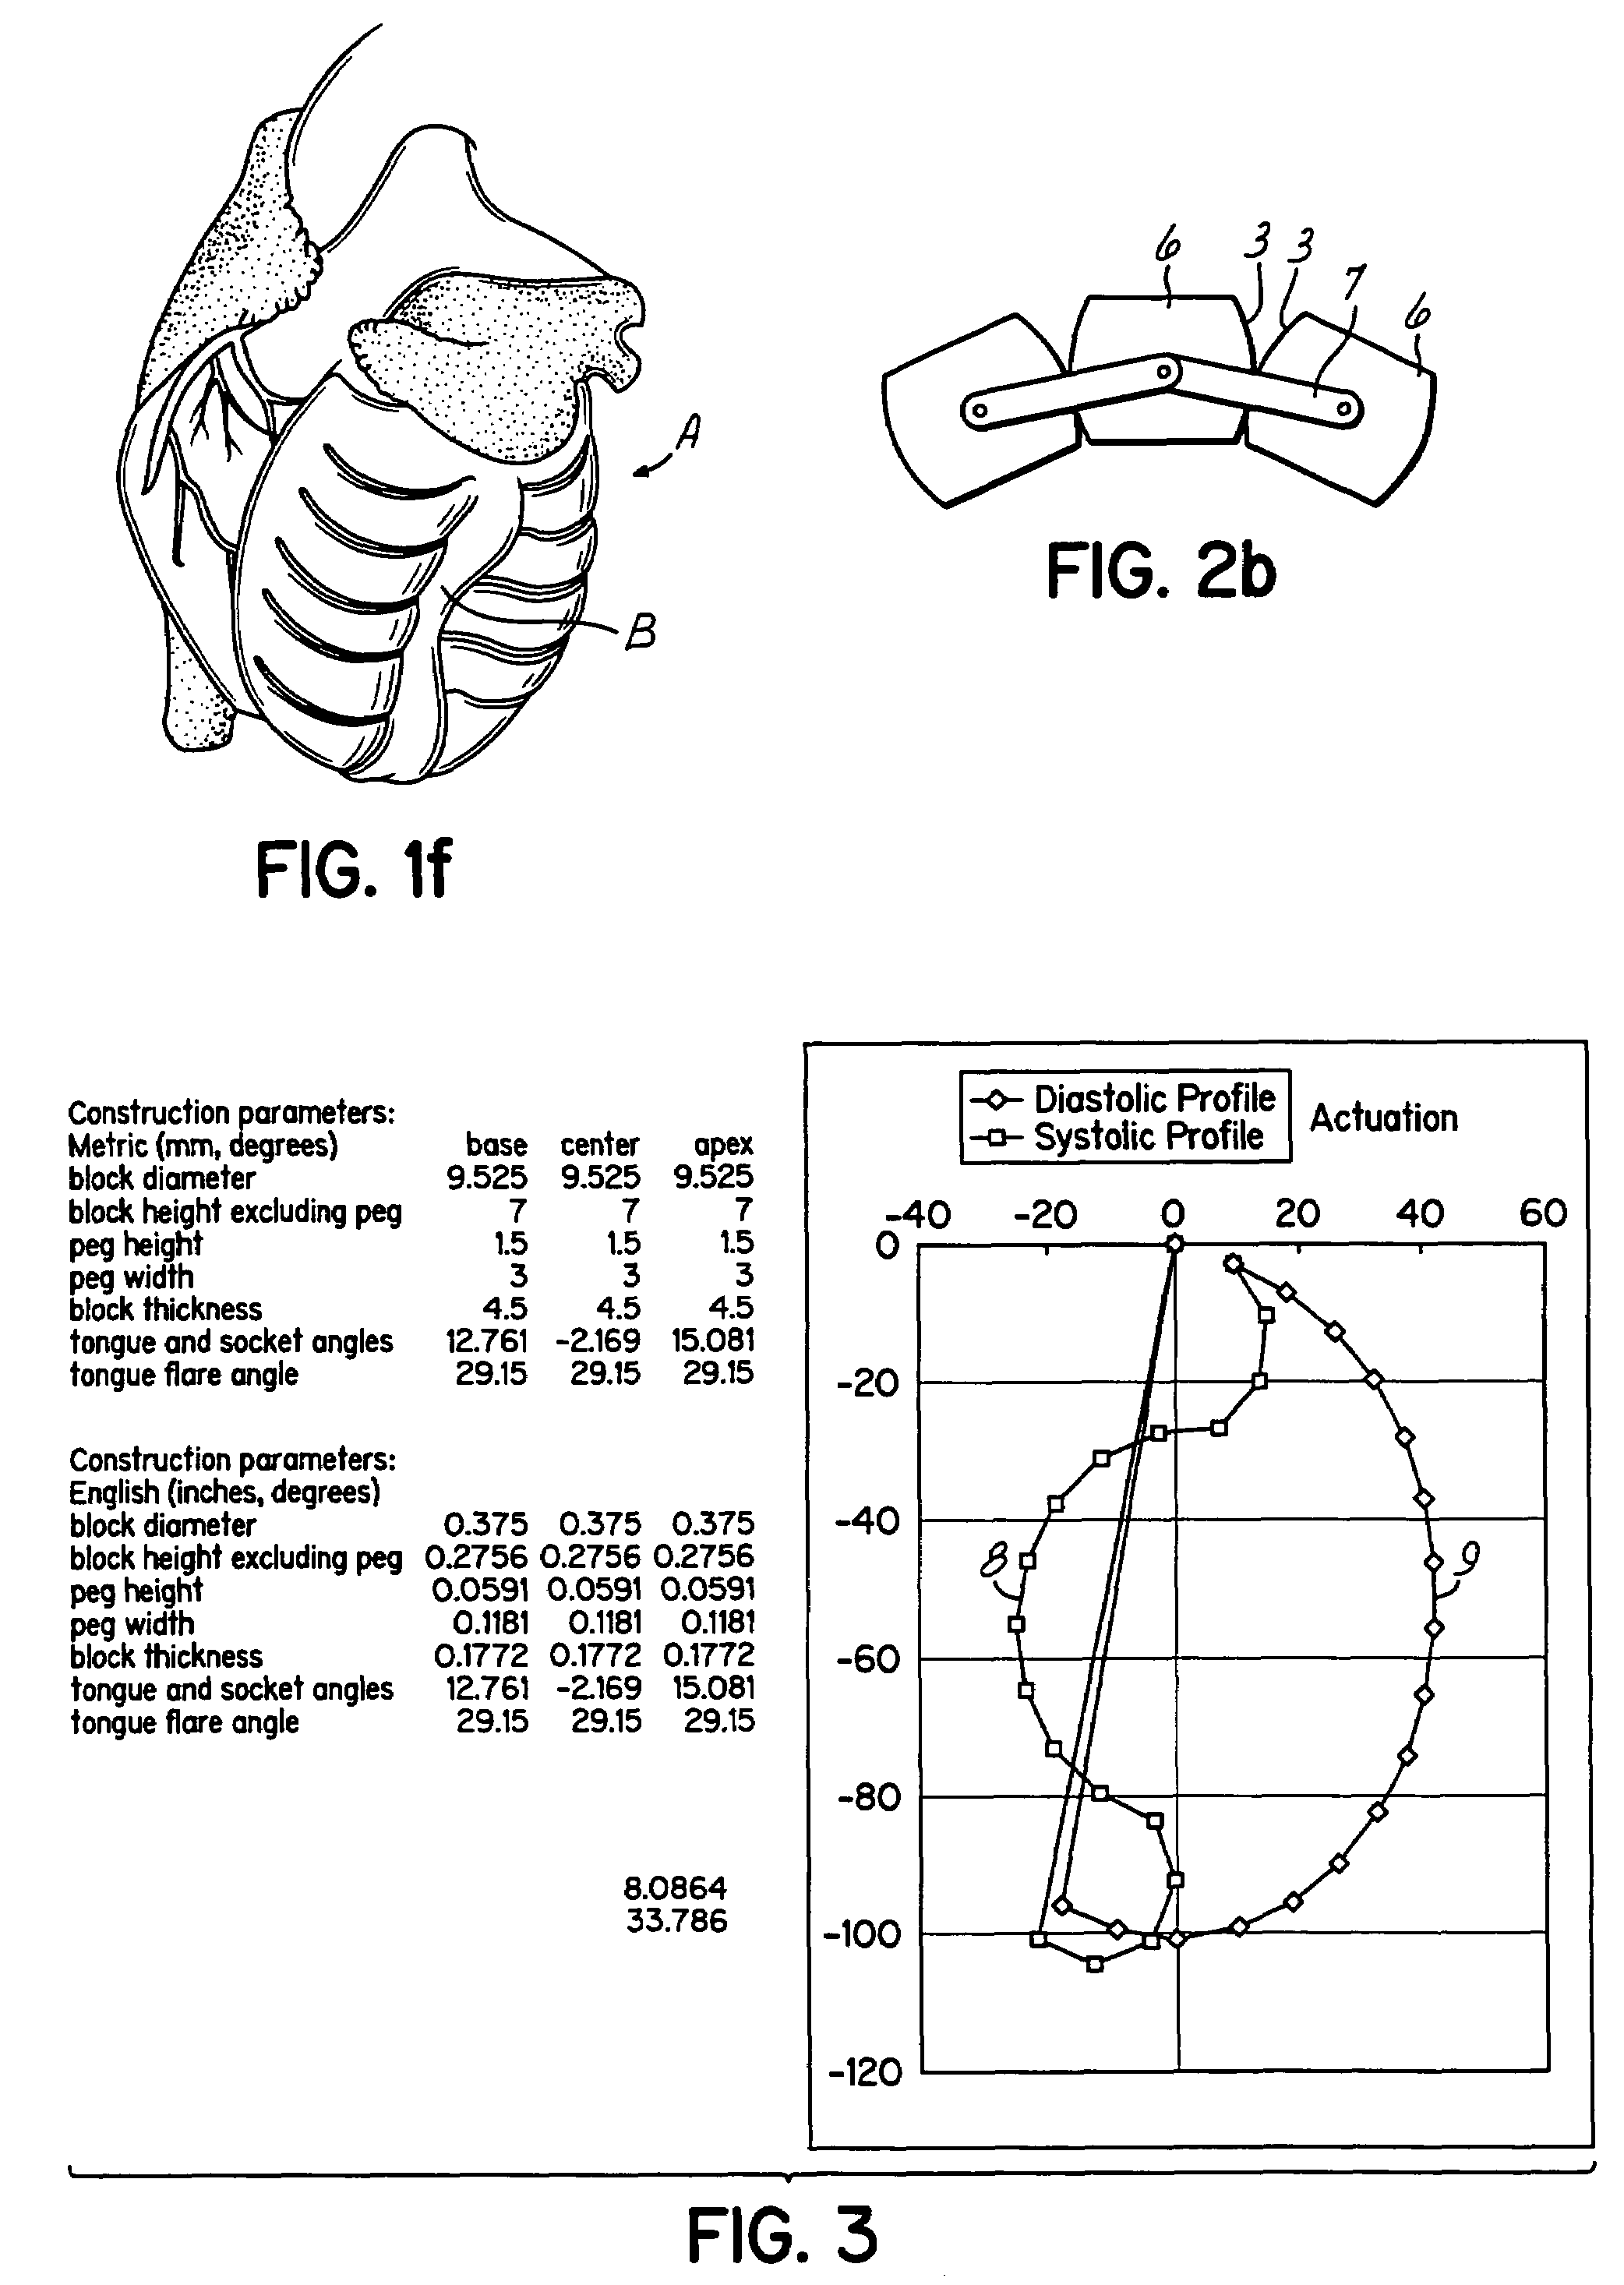 Actuation mechanisms for a heart actuation device